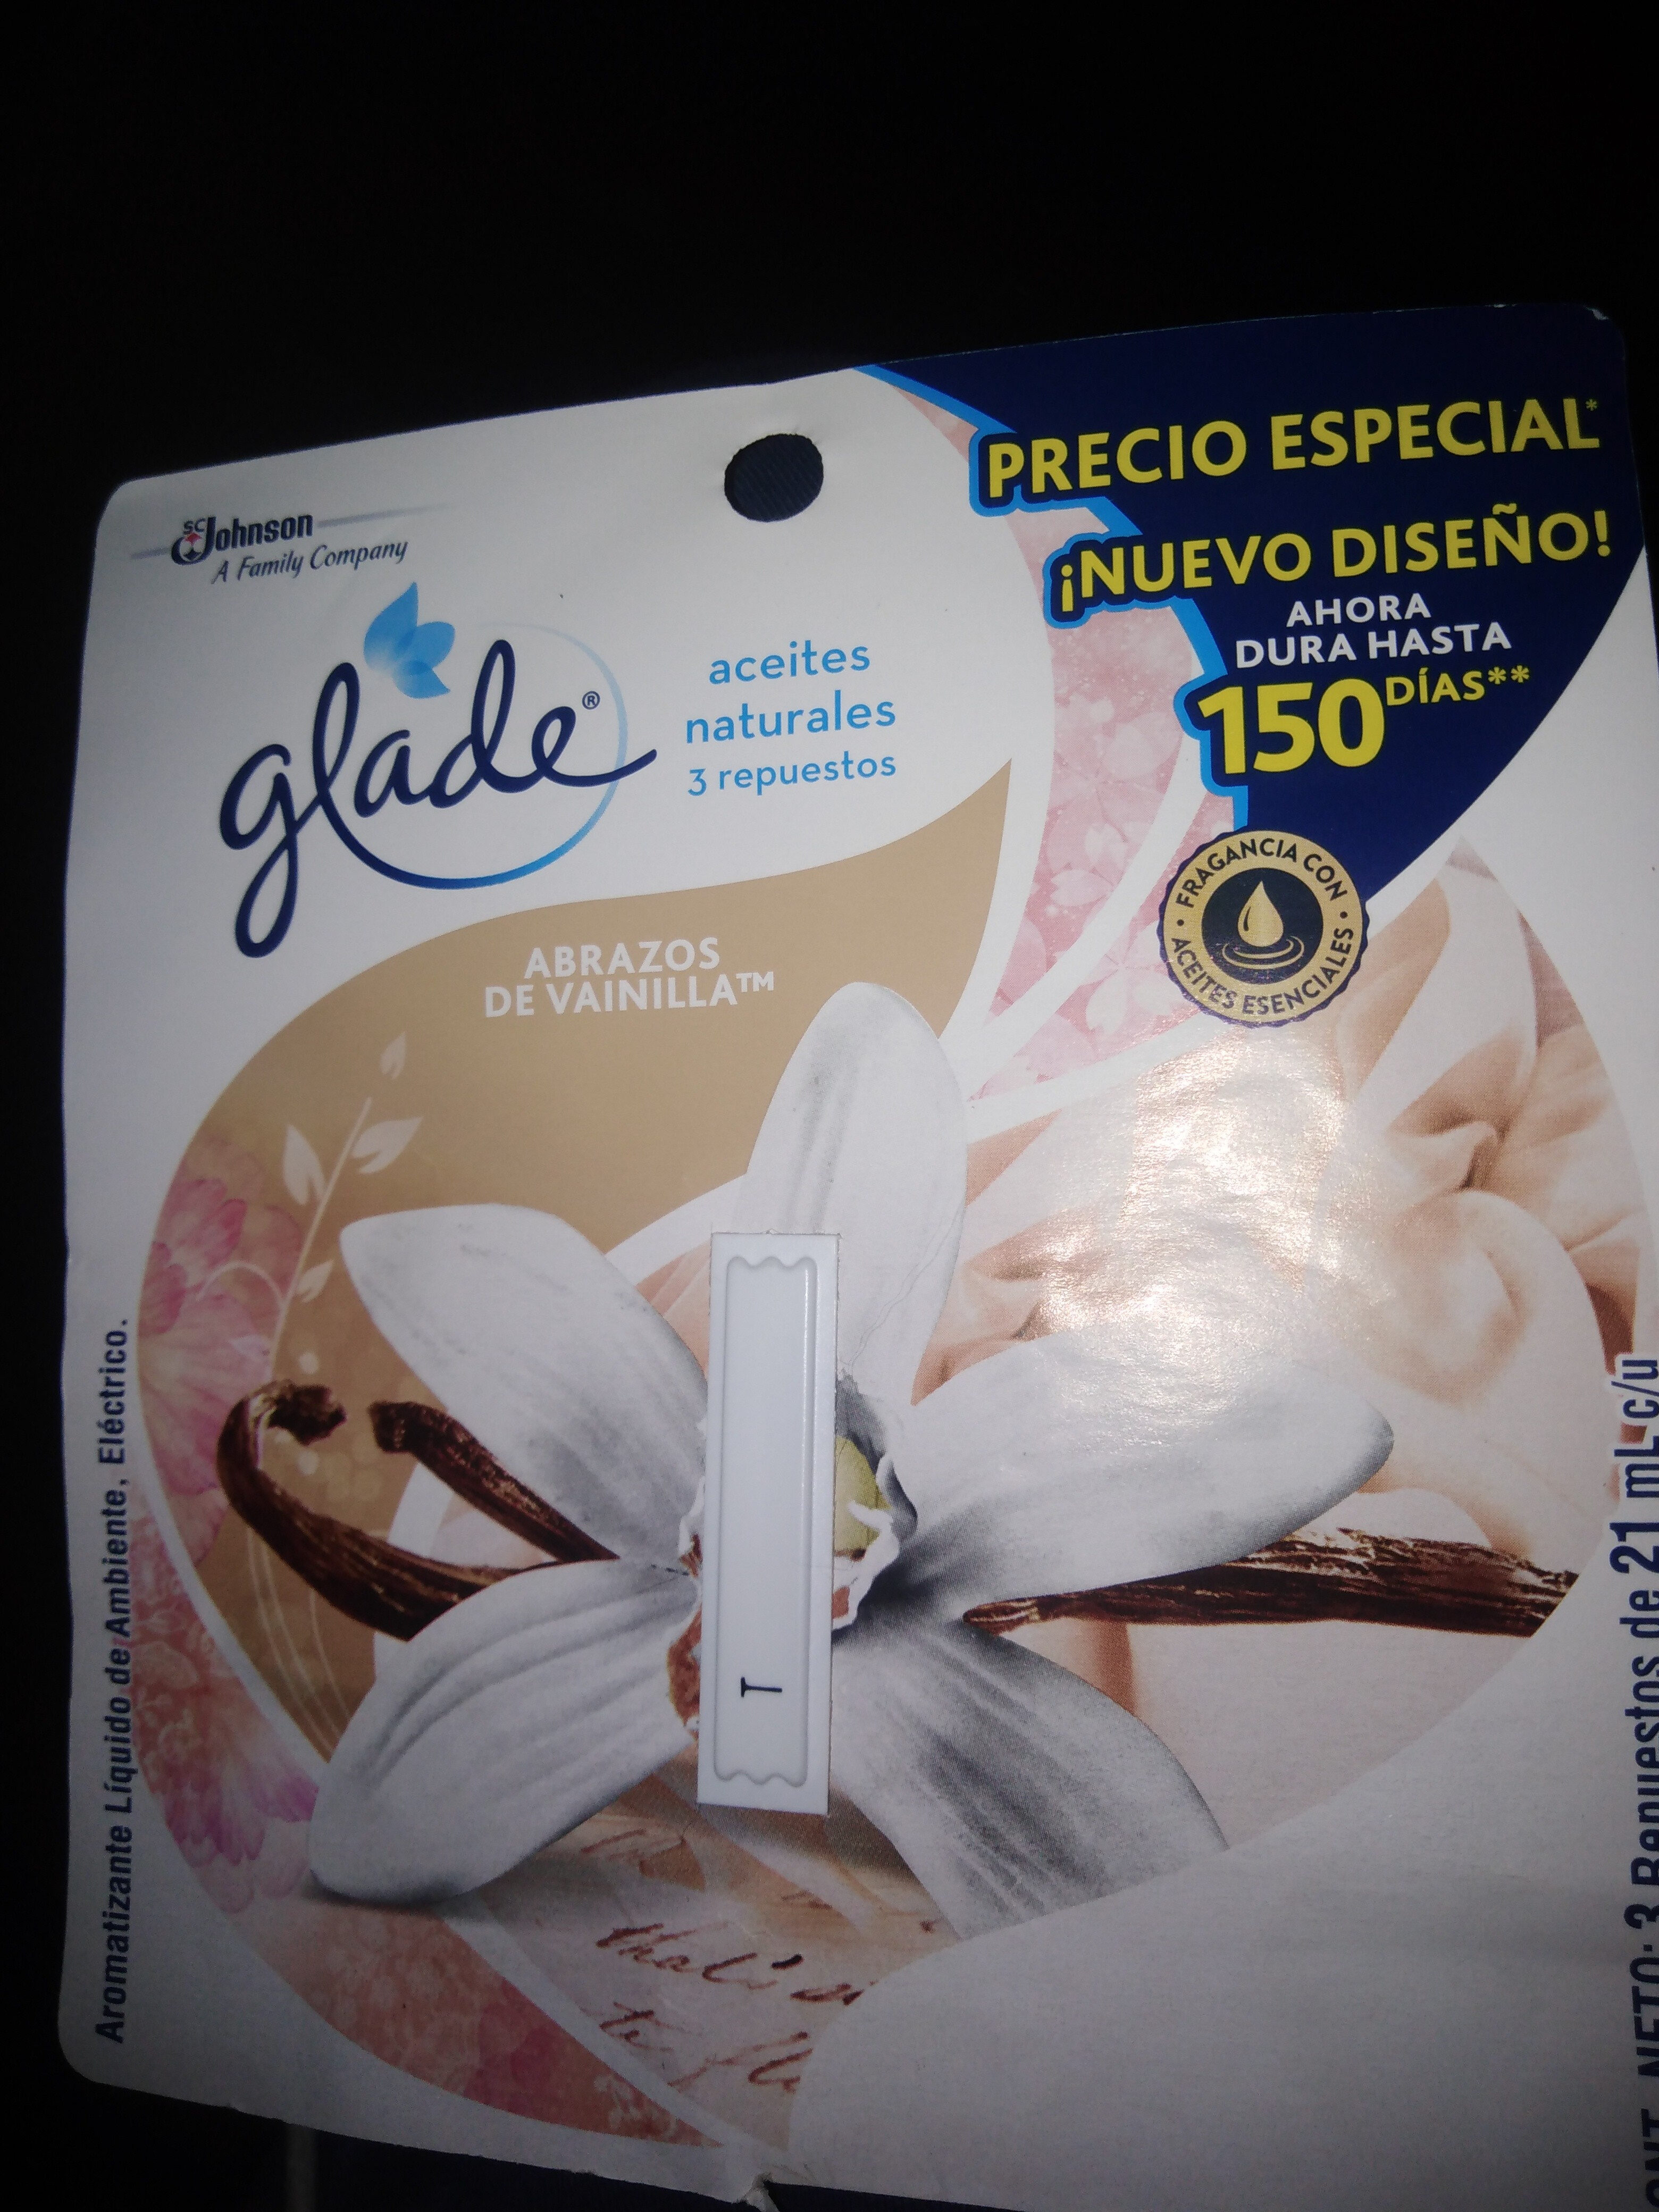 Glade - Product - es